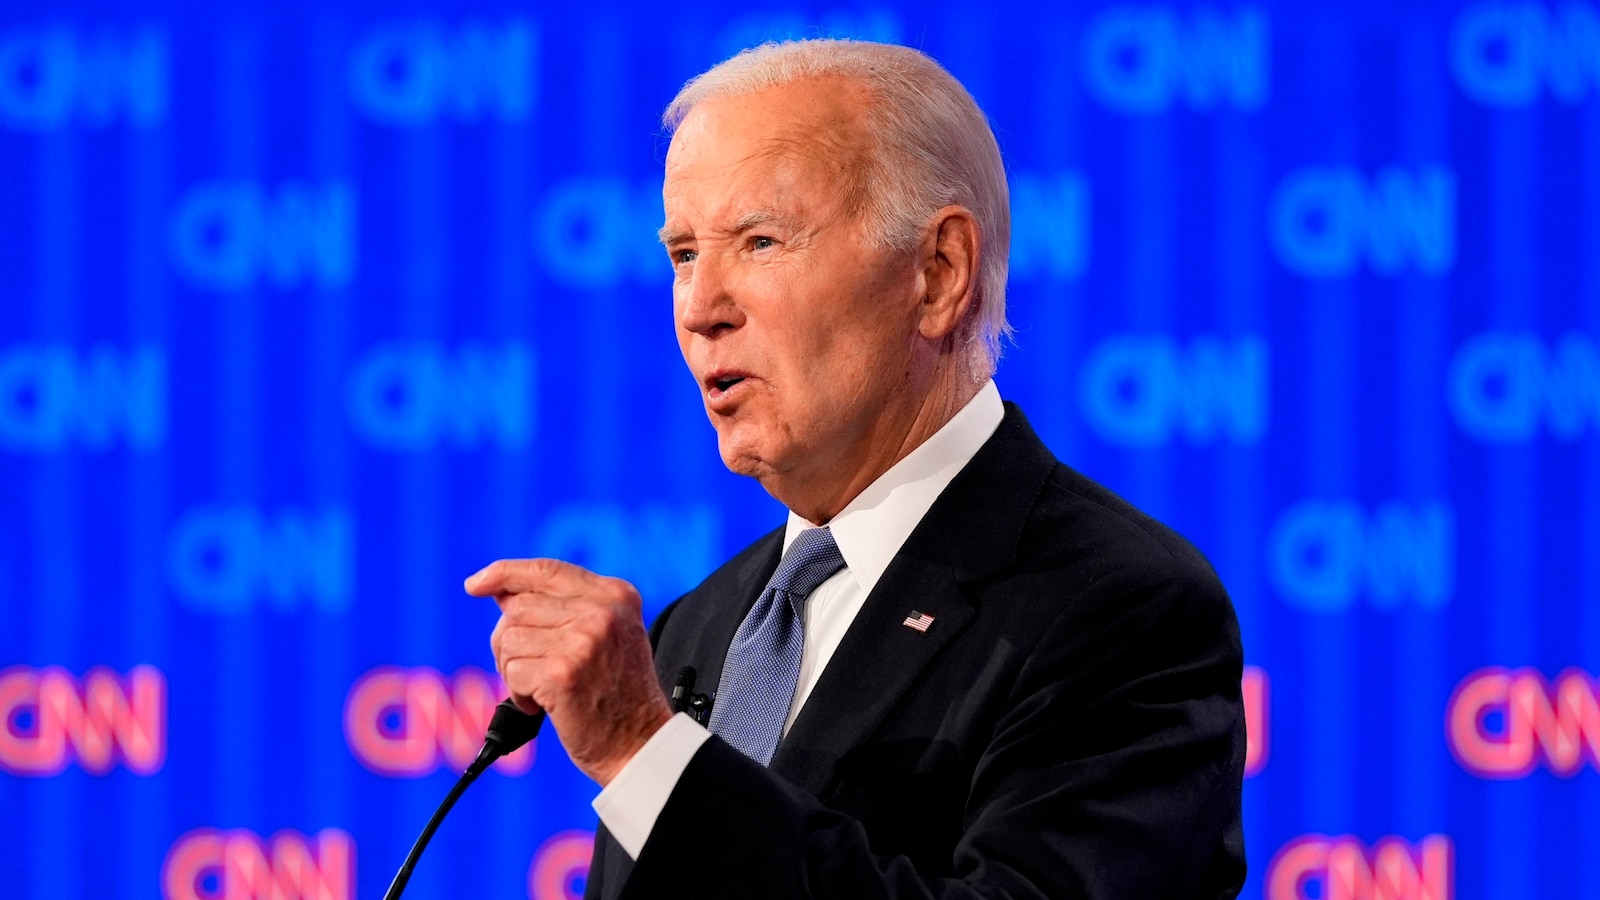 'A direct and candid conversation': Democratic governors speak out before meeting with Biden